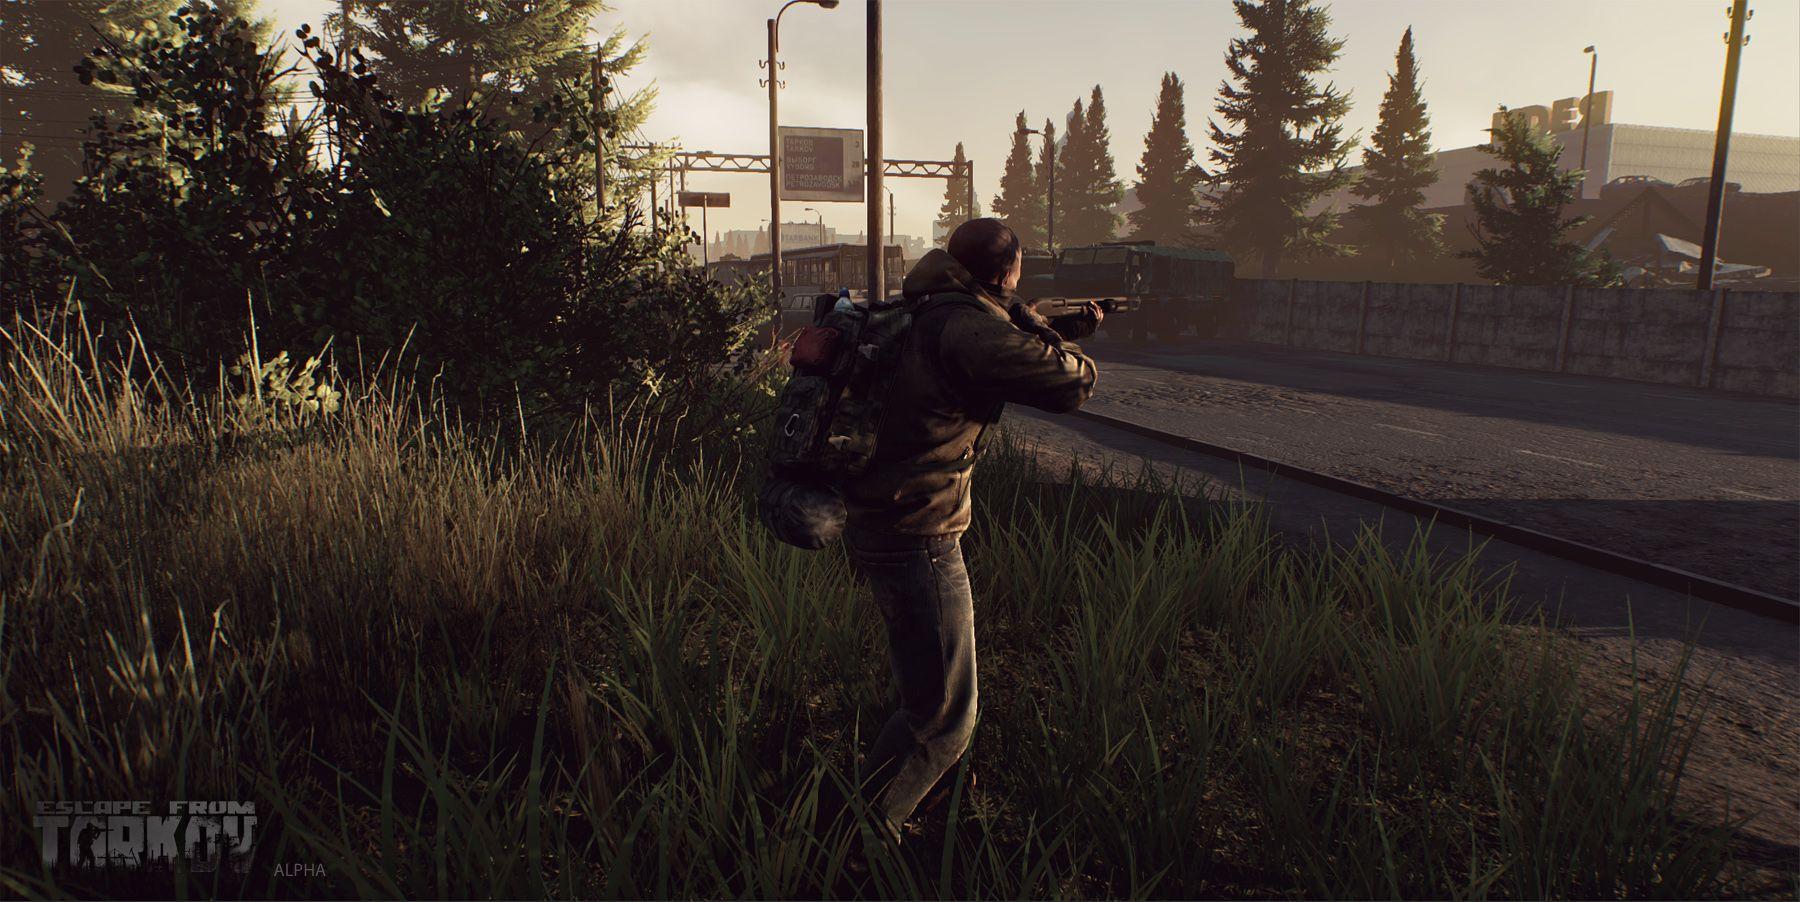 Escape From Tarkov Wallpapers - Top Free Escape From Tarkov Backgrounds ...